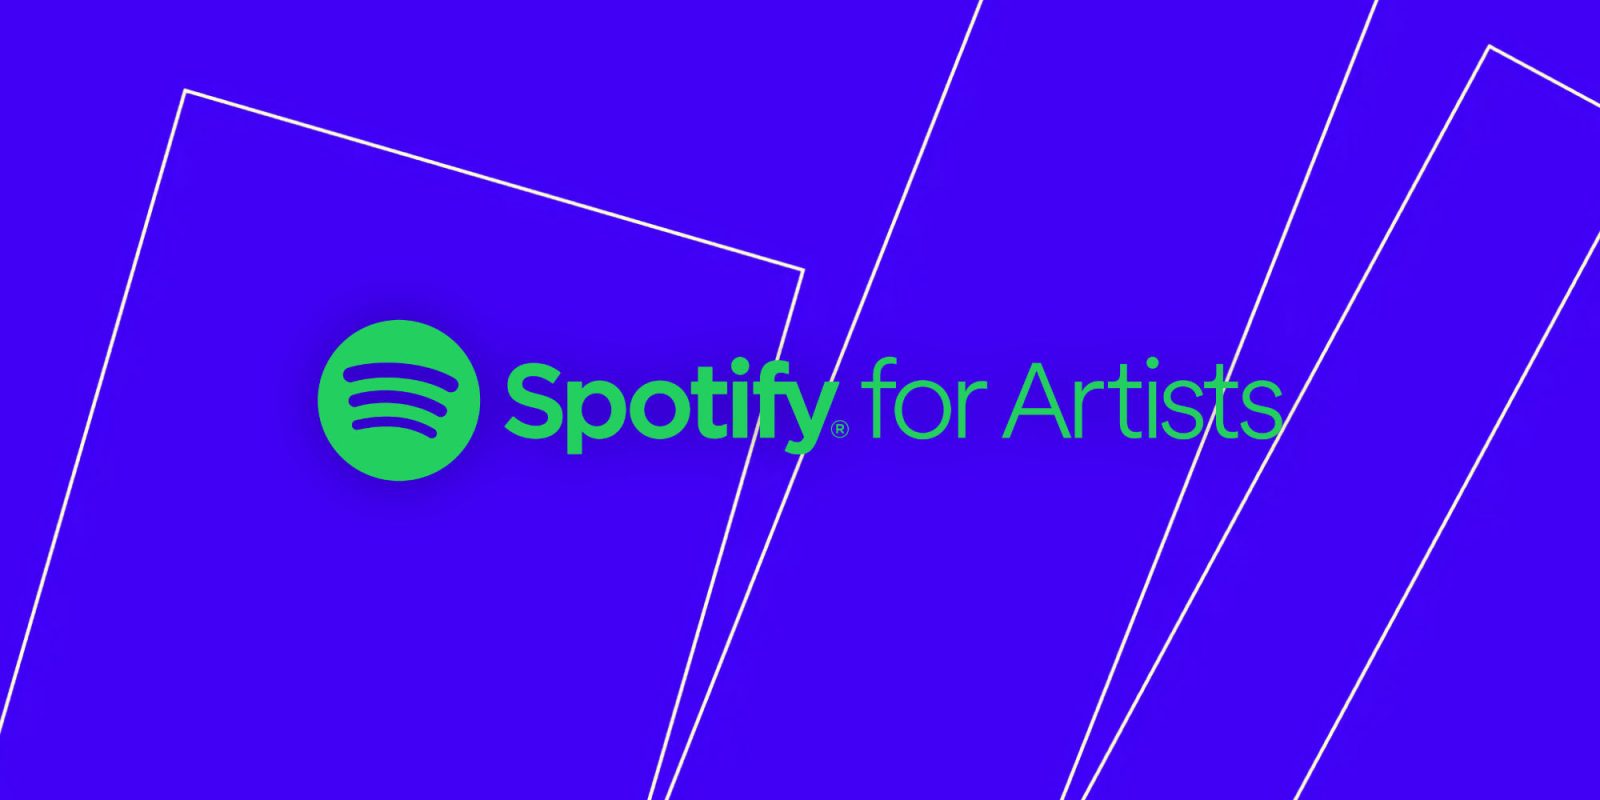 Spotify changes rules for paying artists seeking better payments for professionals